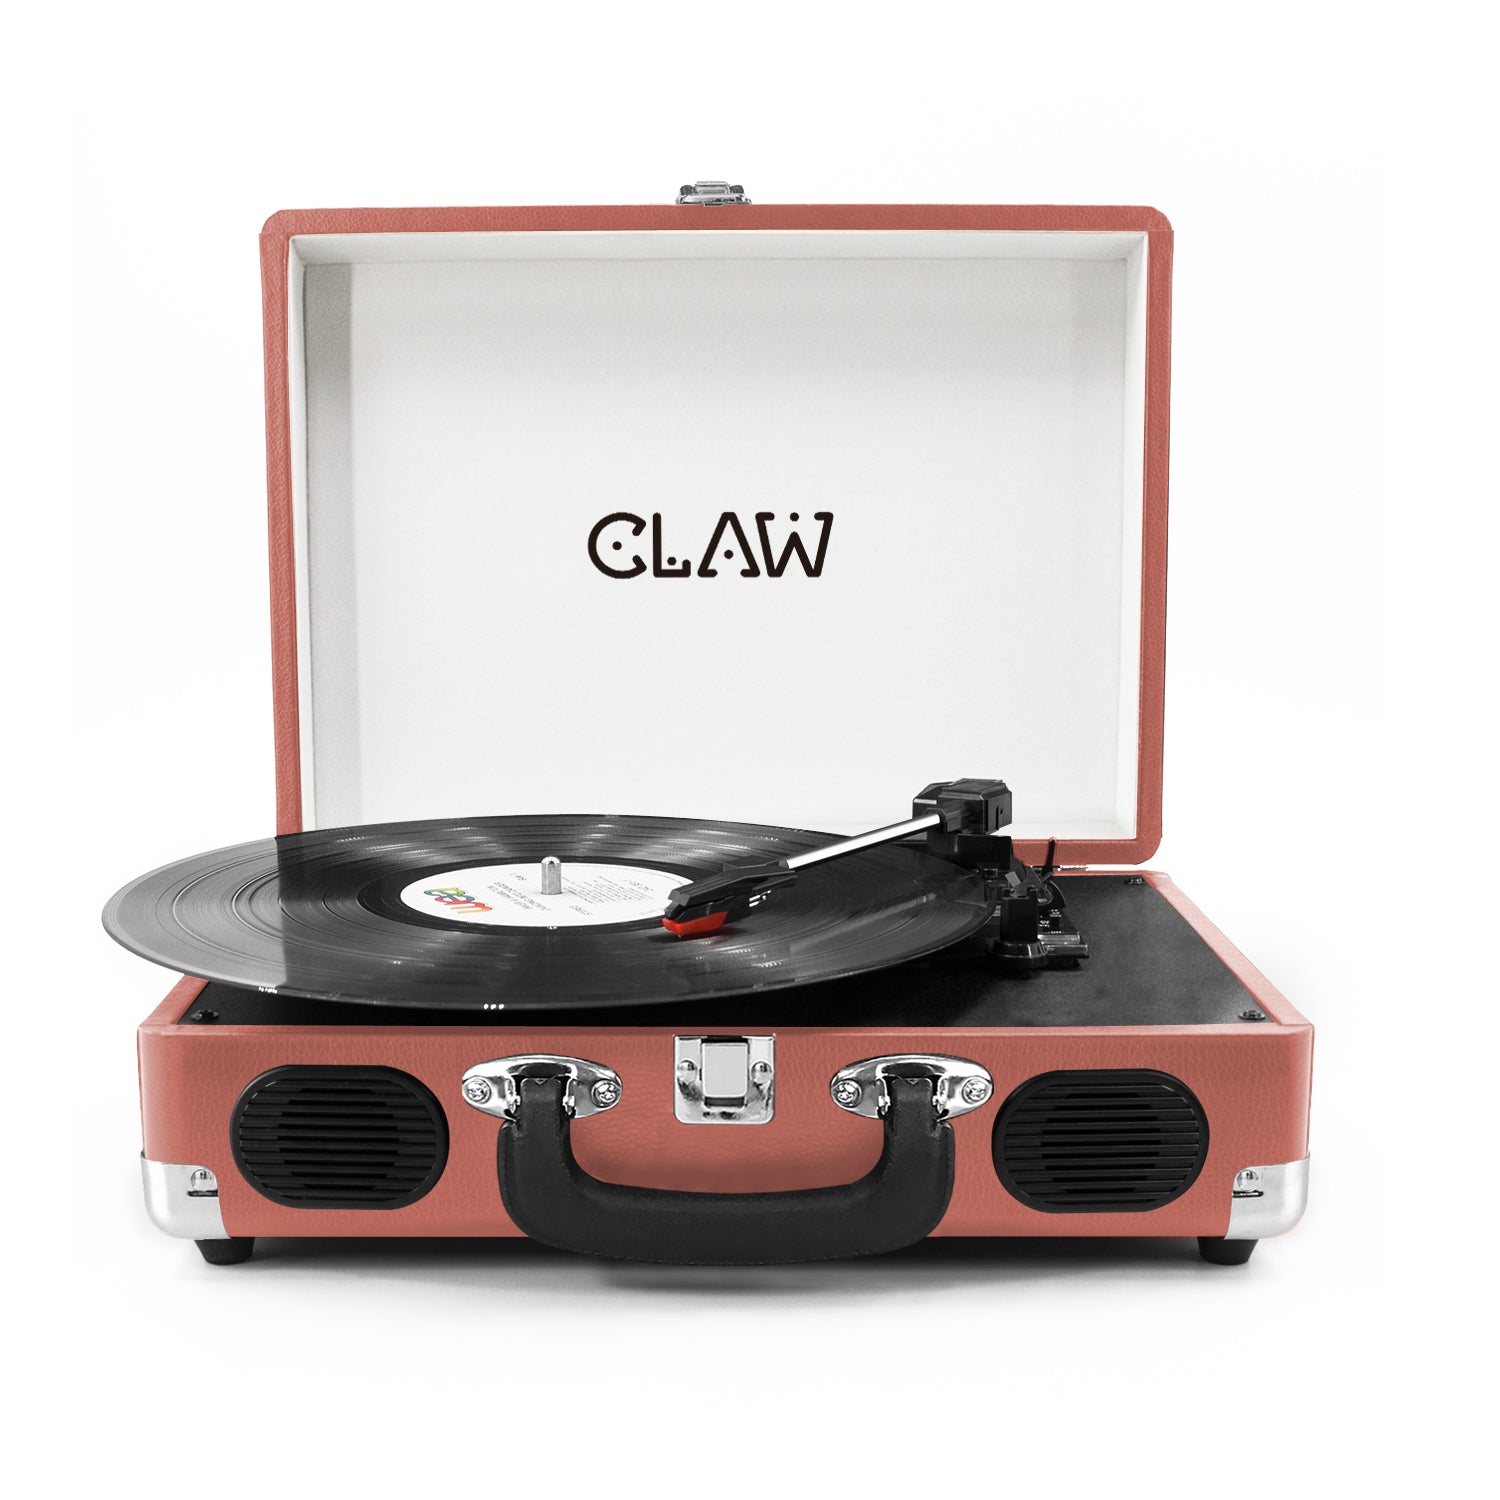 CLAW Stag Portable - Turntable with built-in stereo speaker (Pink) (Use Code Origin5 to Get 5% Discount)